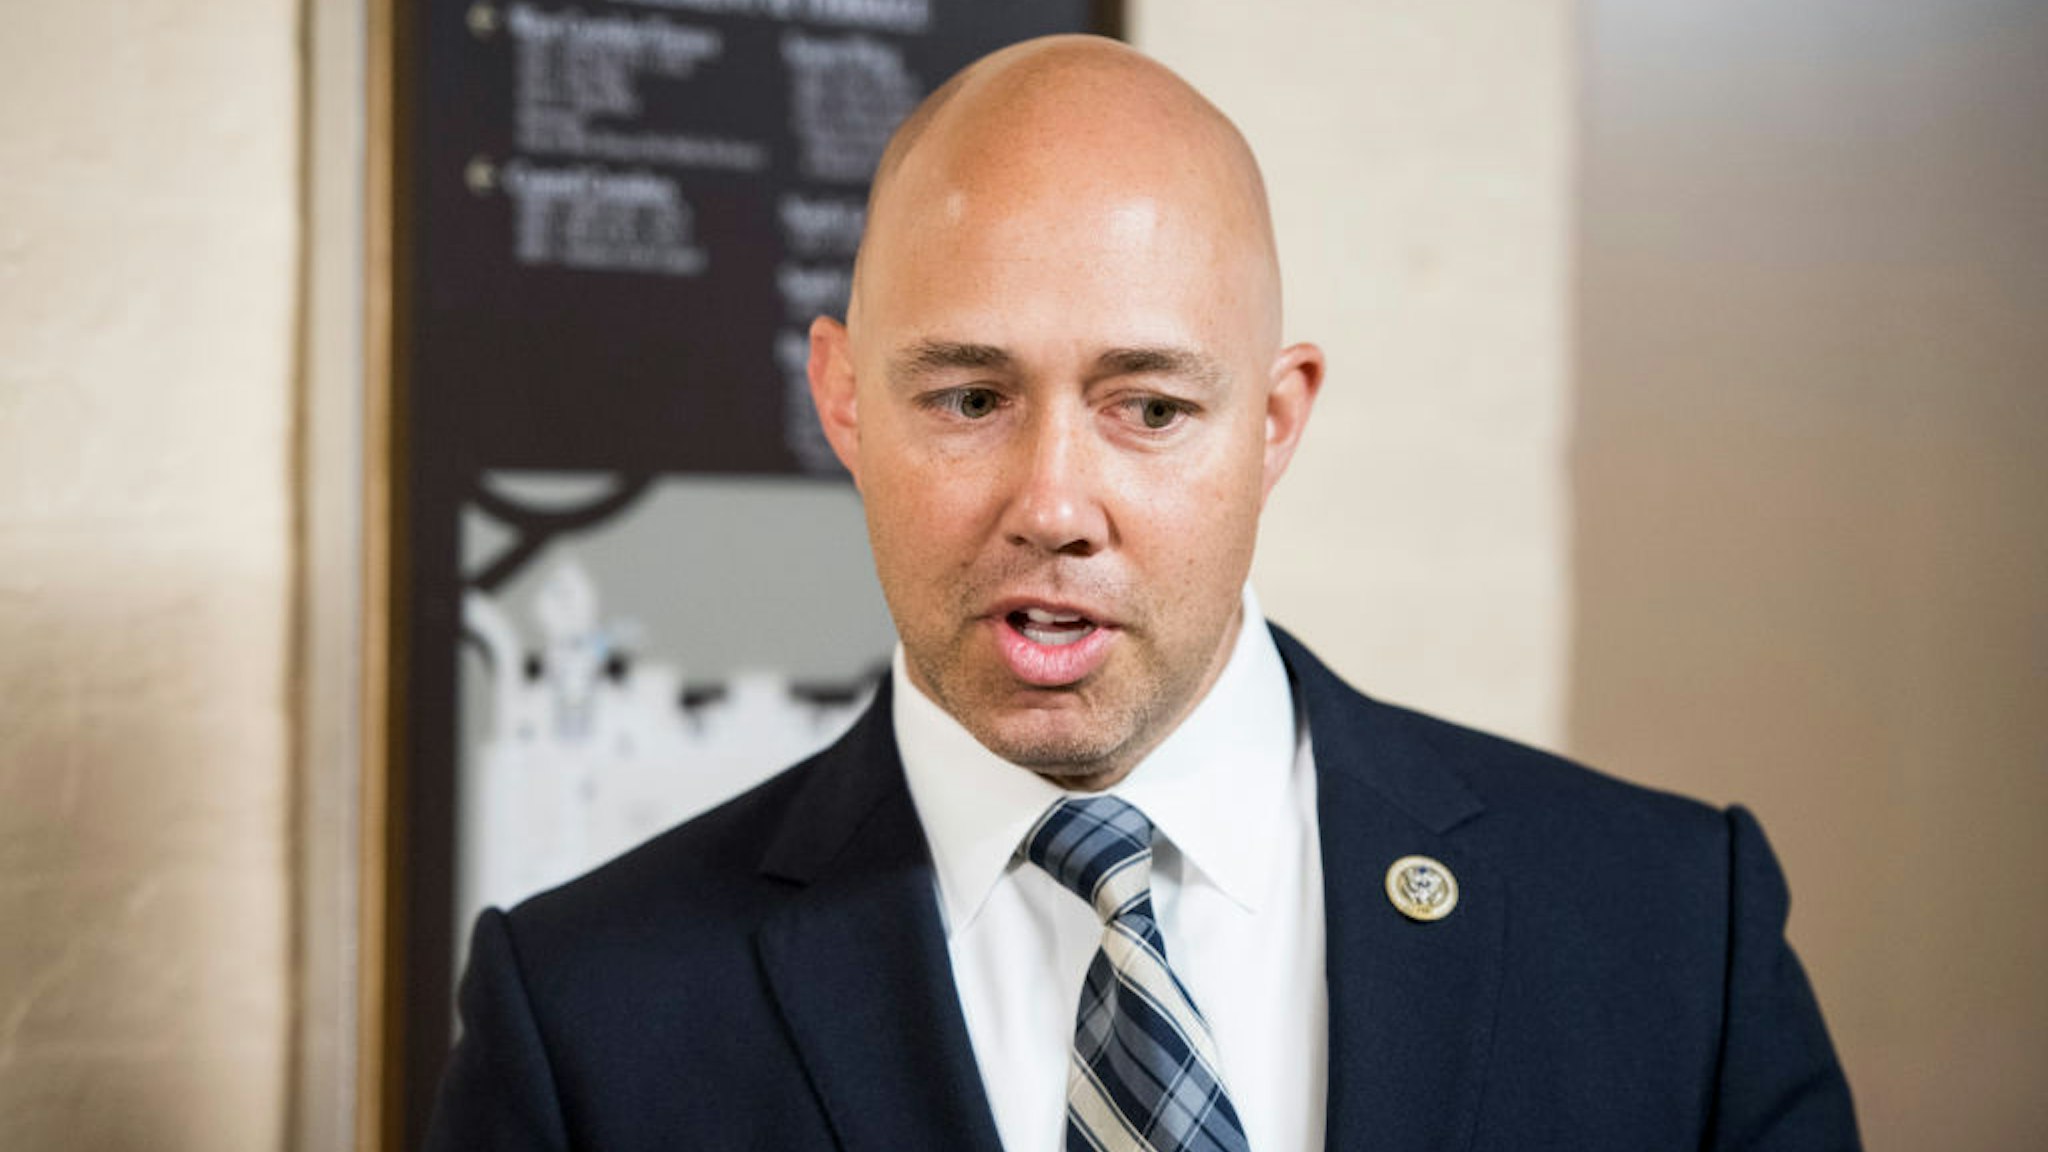 UNITED STATES - JUNE 20: Rep. Brian Mast, R-Fla., leaves the House Republican Conference meeting in the Capitol on Wednesday, June 20, 2018.